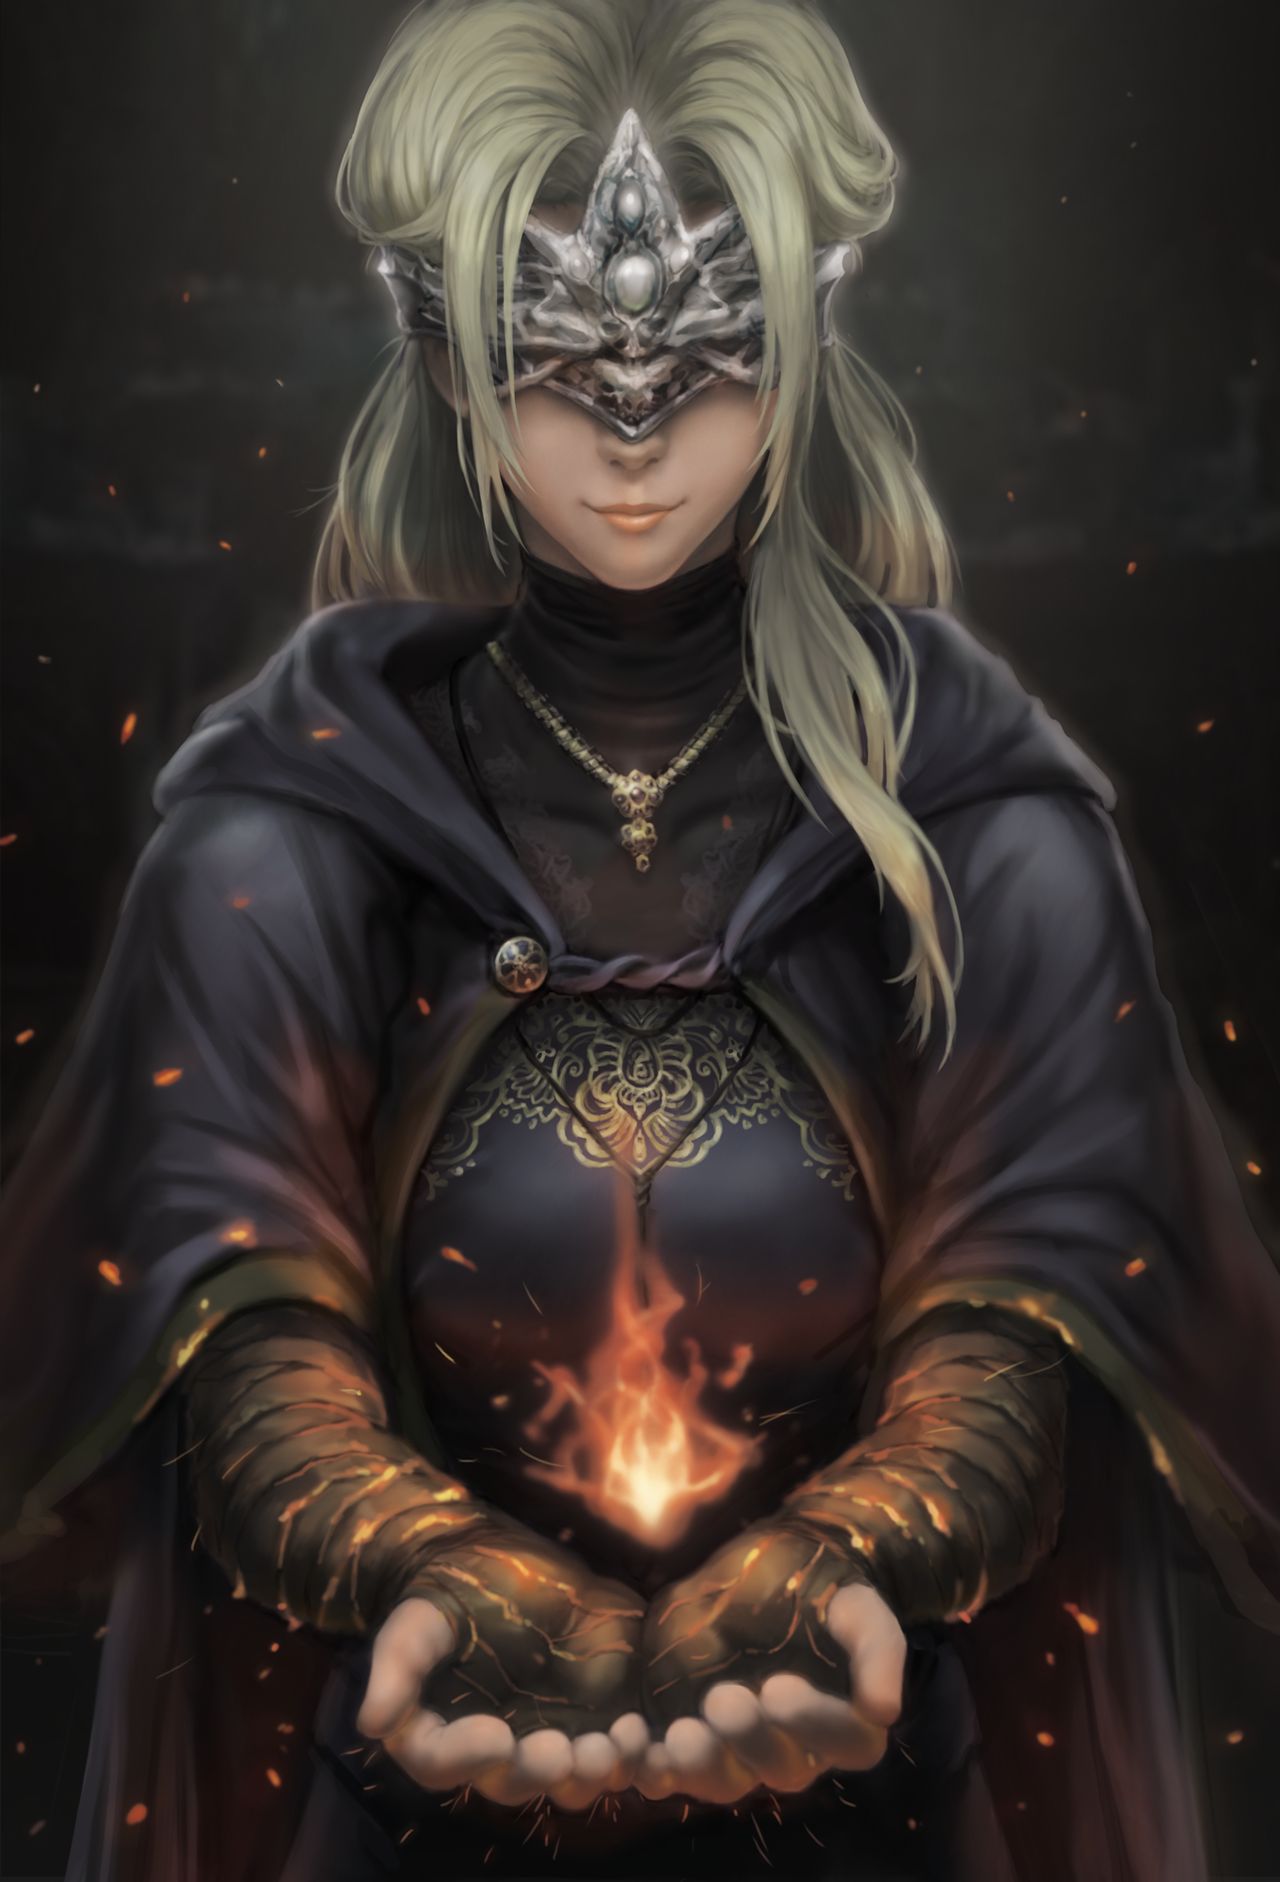 Firekeeper from Dark souls 3 Collection 51